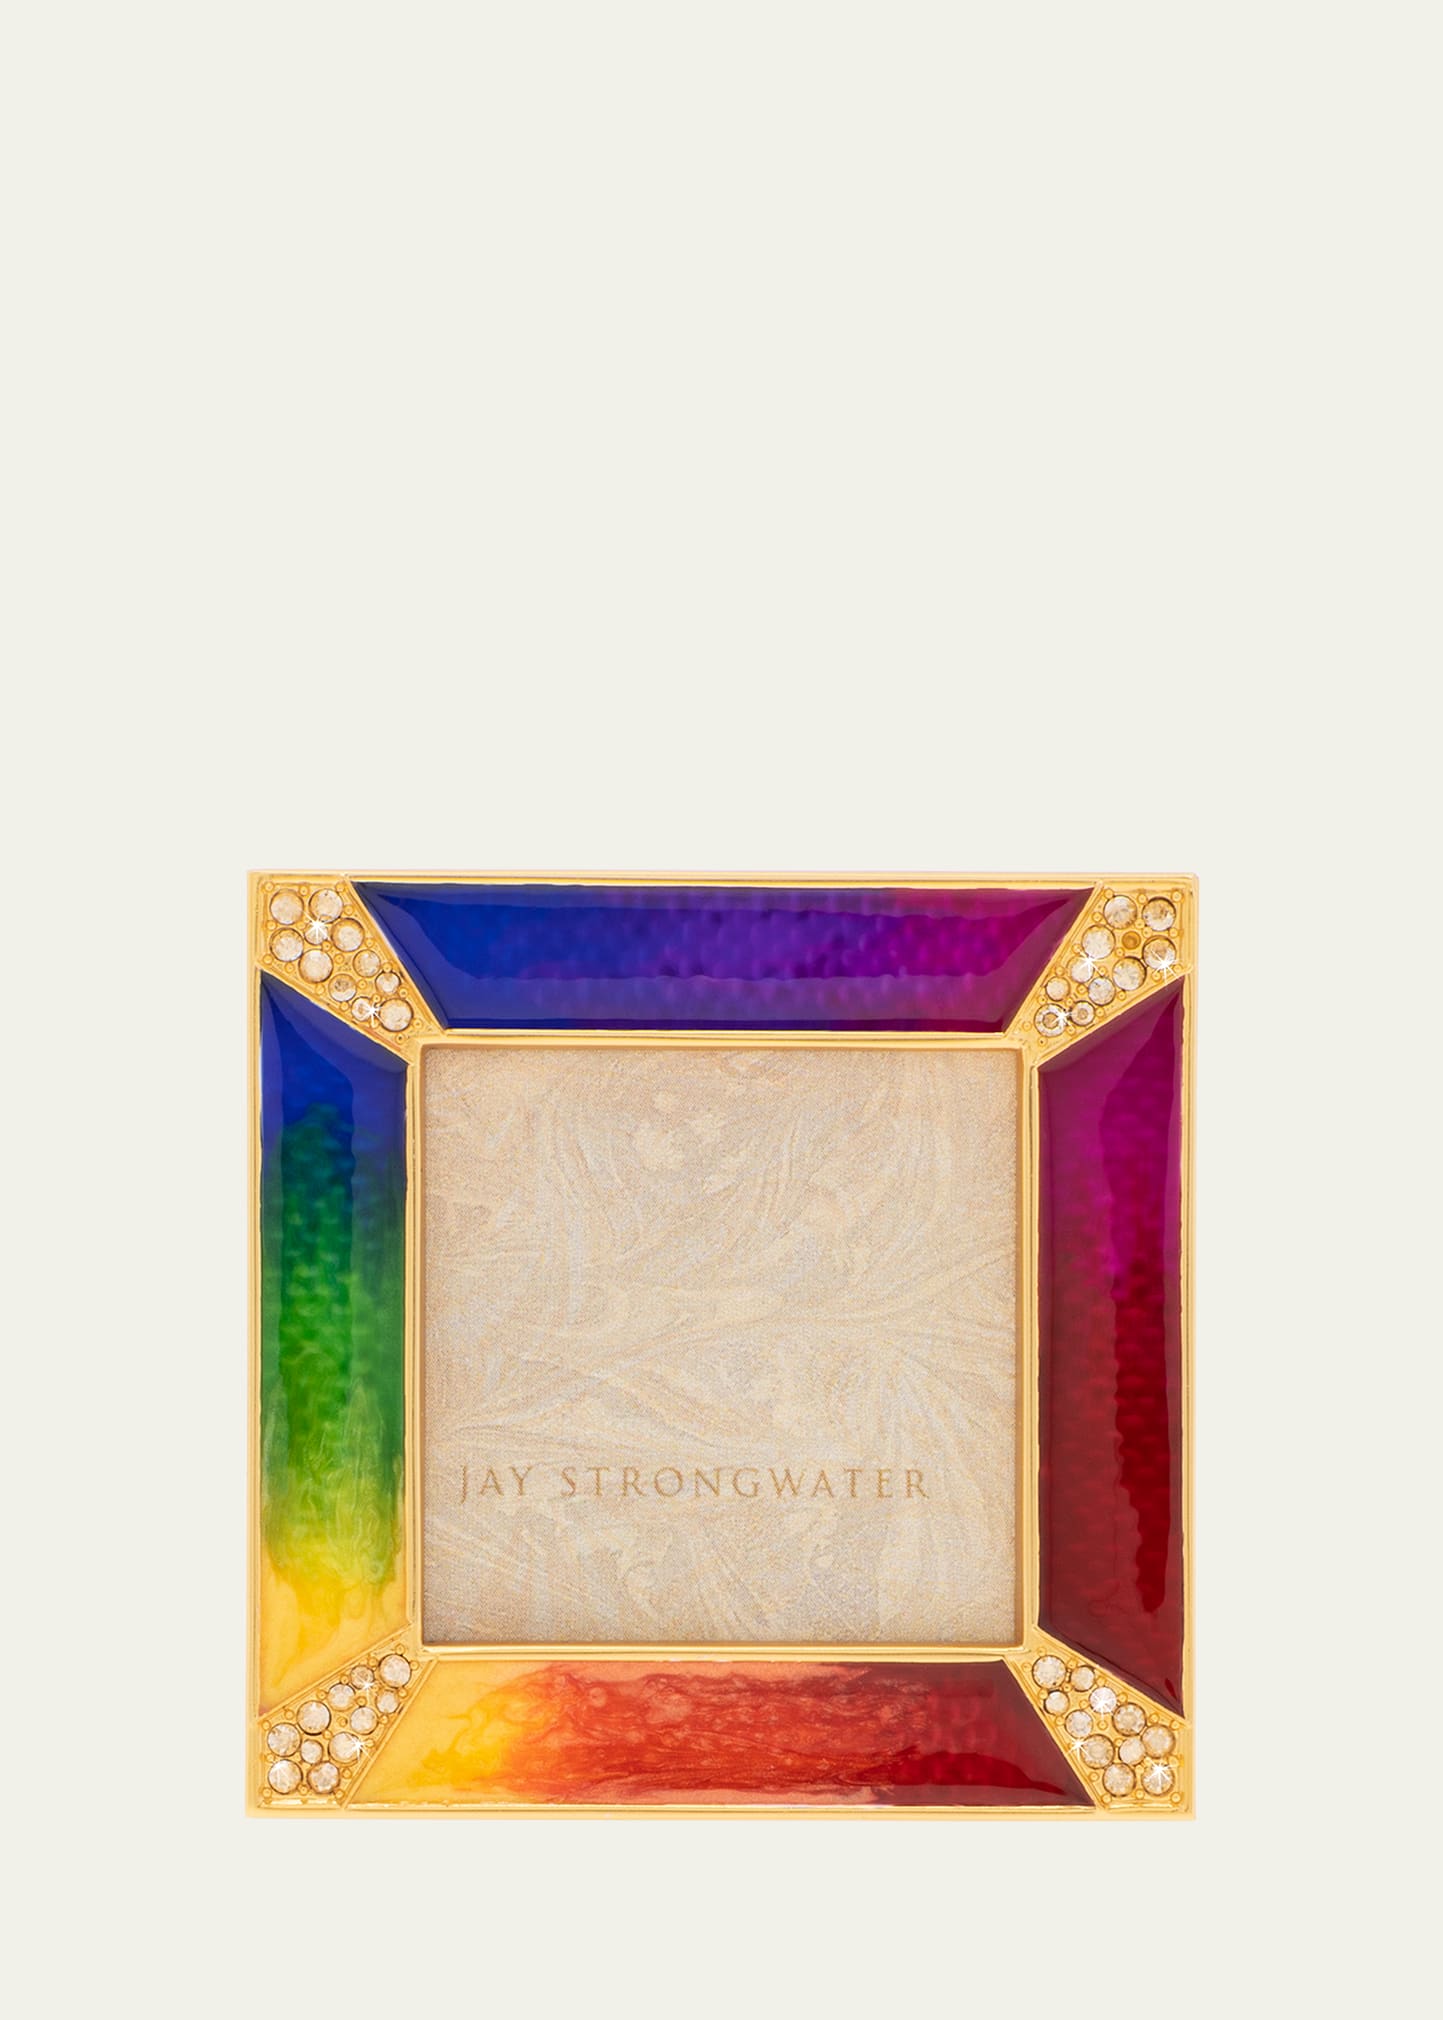 JAY STRONGWATER RAINBOW PAVE CORNER SQUARE FRAME, 2"SQ.